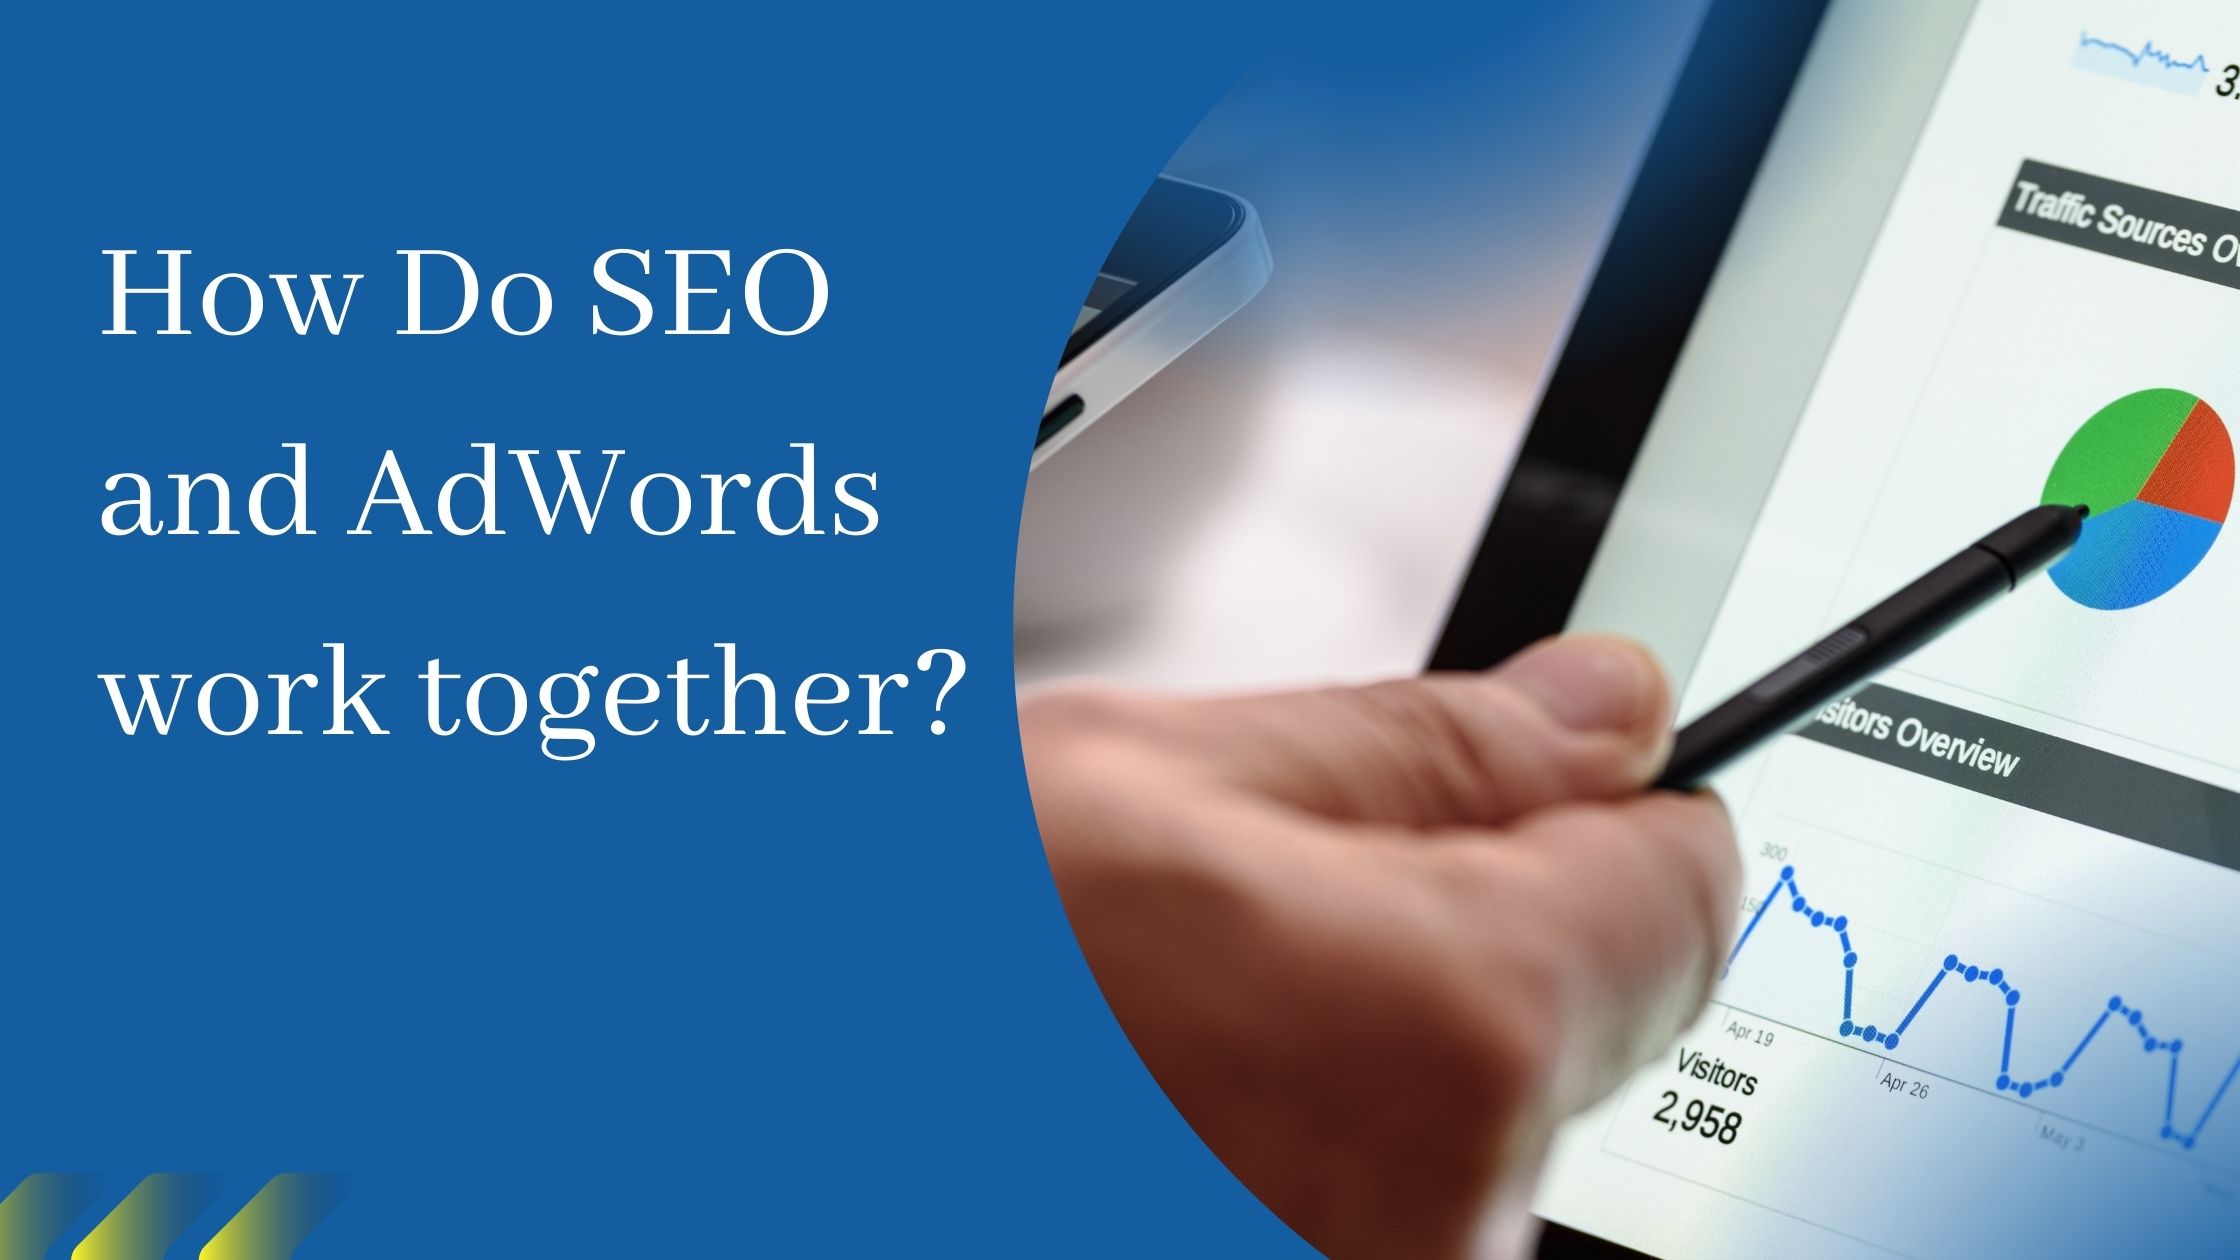 How Do SEO and AdWords work together? It’s Easy.